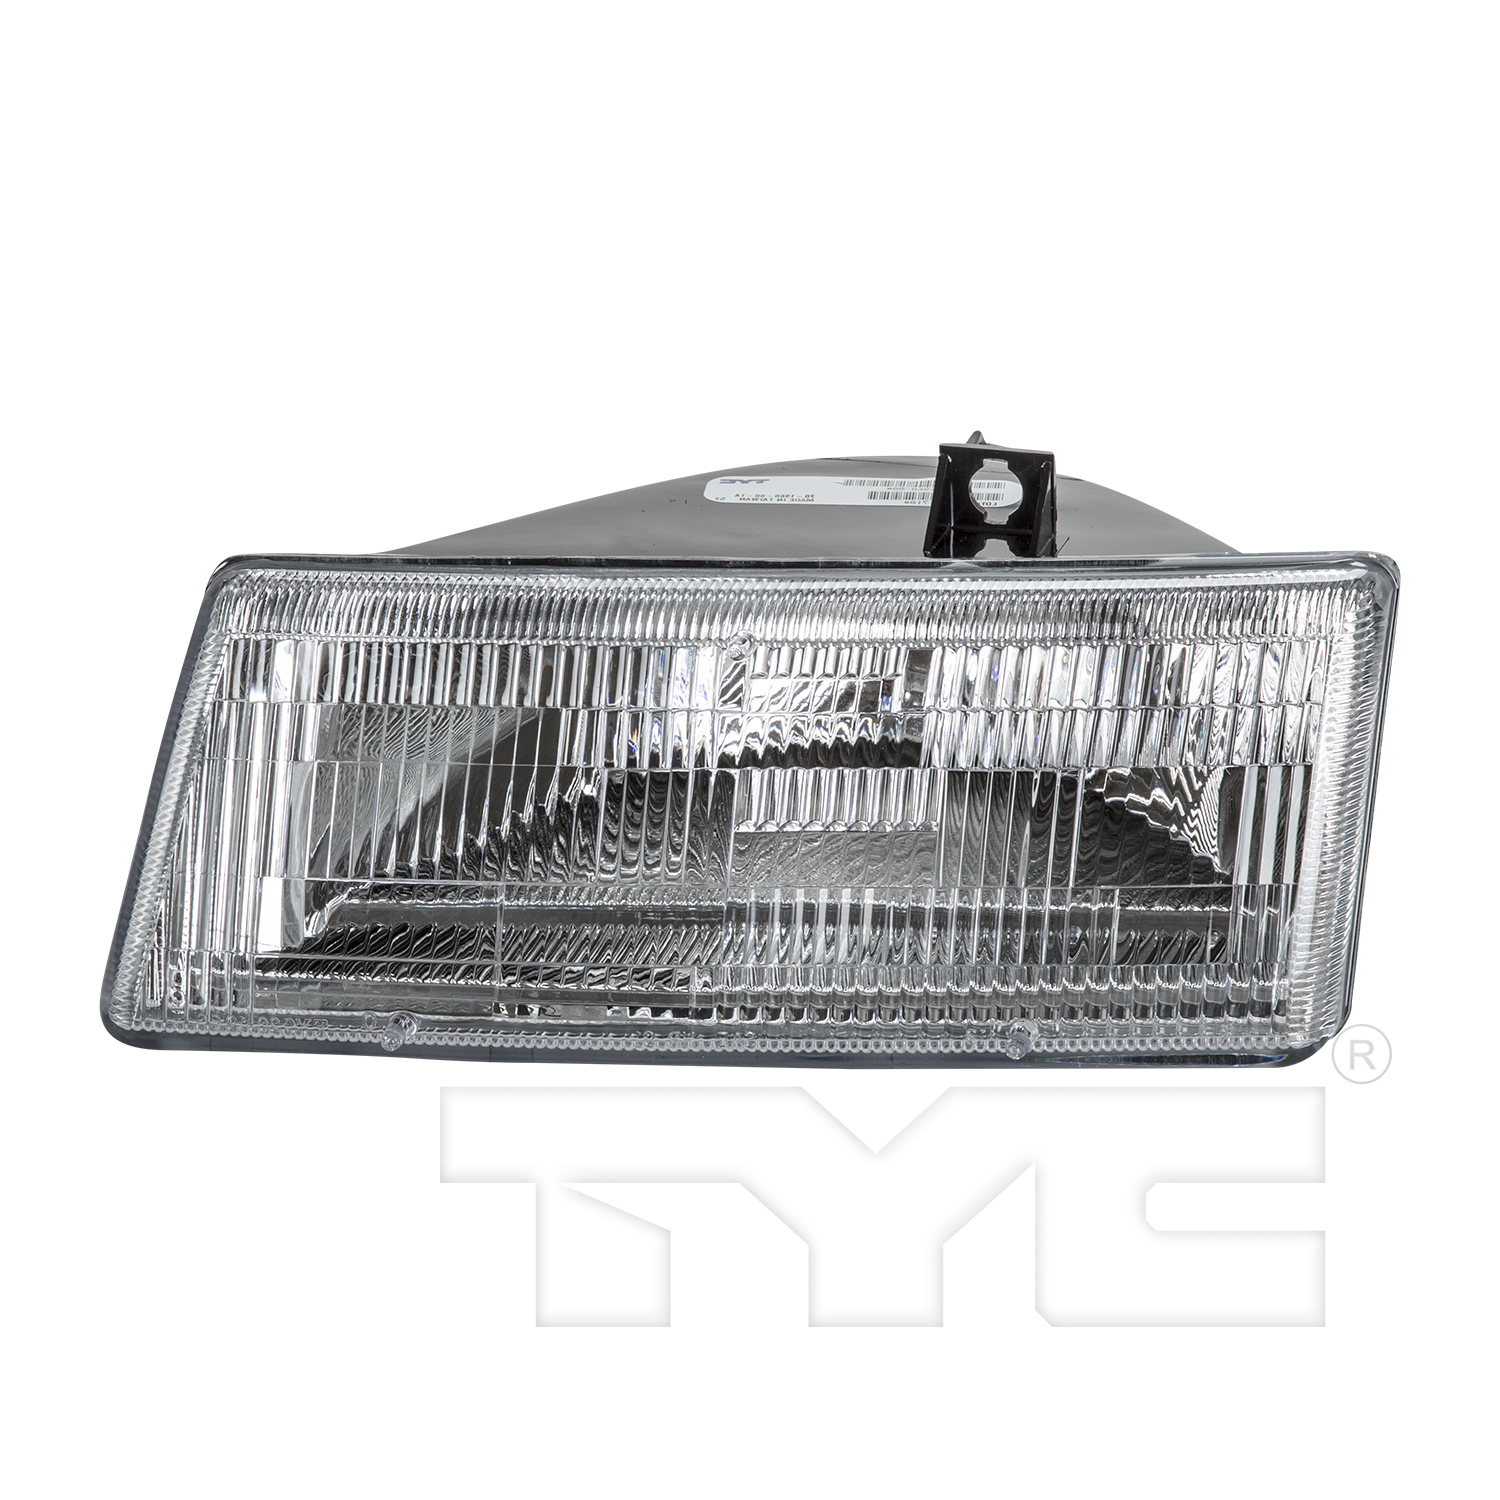 Aftermarket HEADLIGHTS for CHRYSLER - TOWN & COUNTRY, TOWN & COUNTRY,91-95,LT Headlamp lens/housing